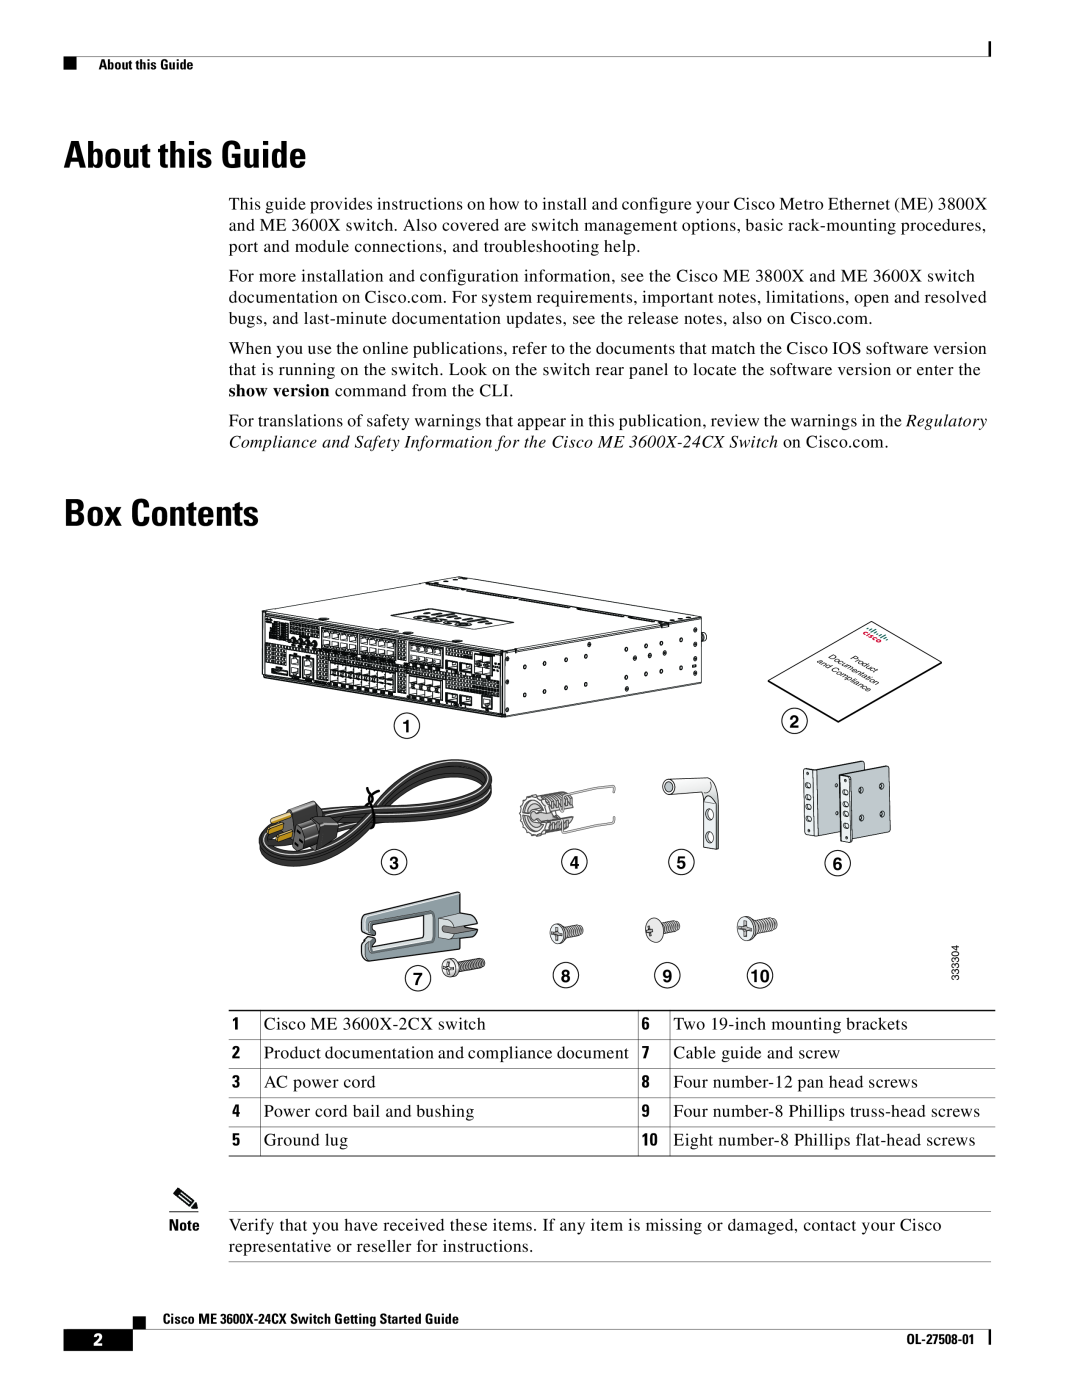 Cisco Systems ME3600X24FSM, ME 3600X 24CX manual About this Guide, Box Contents 